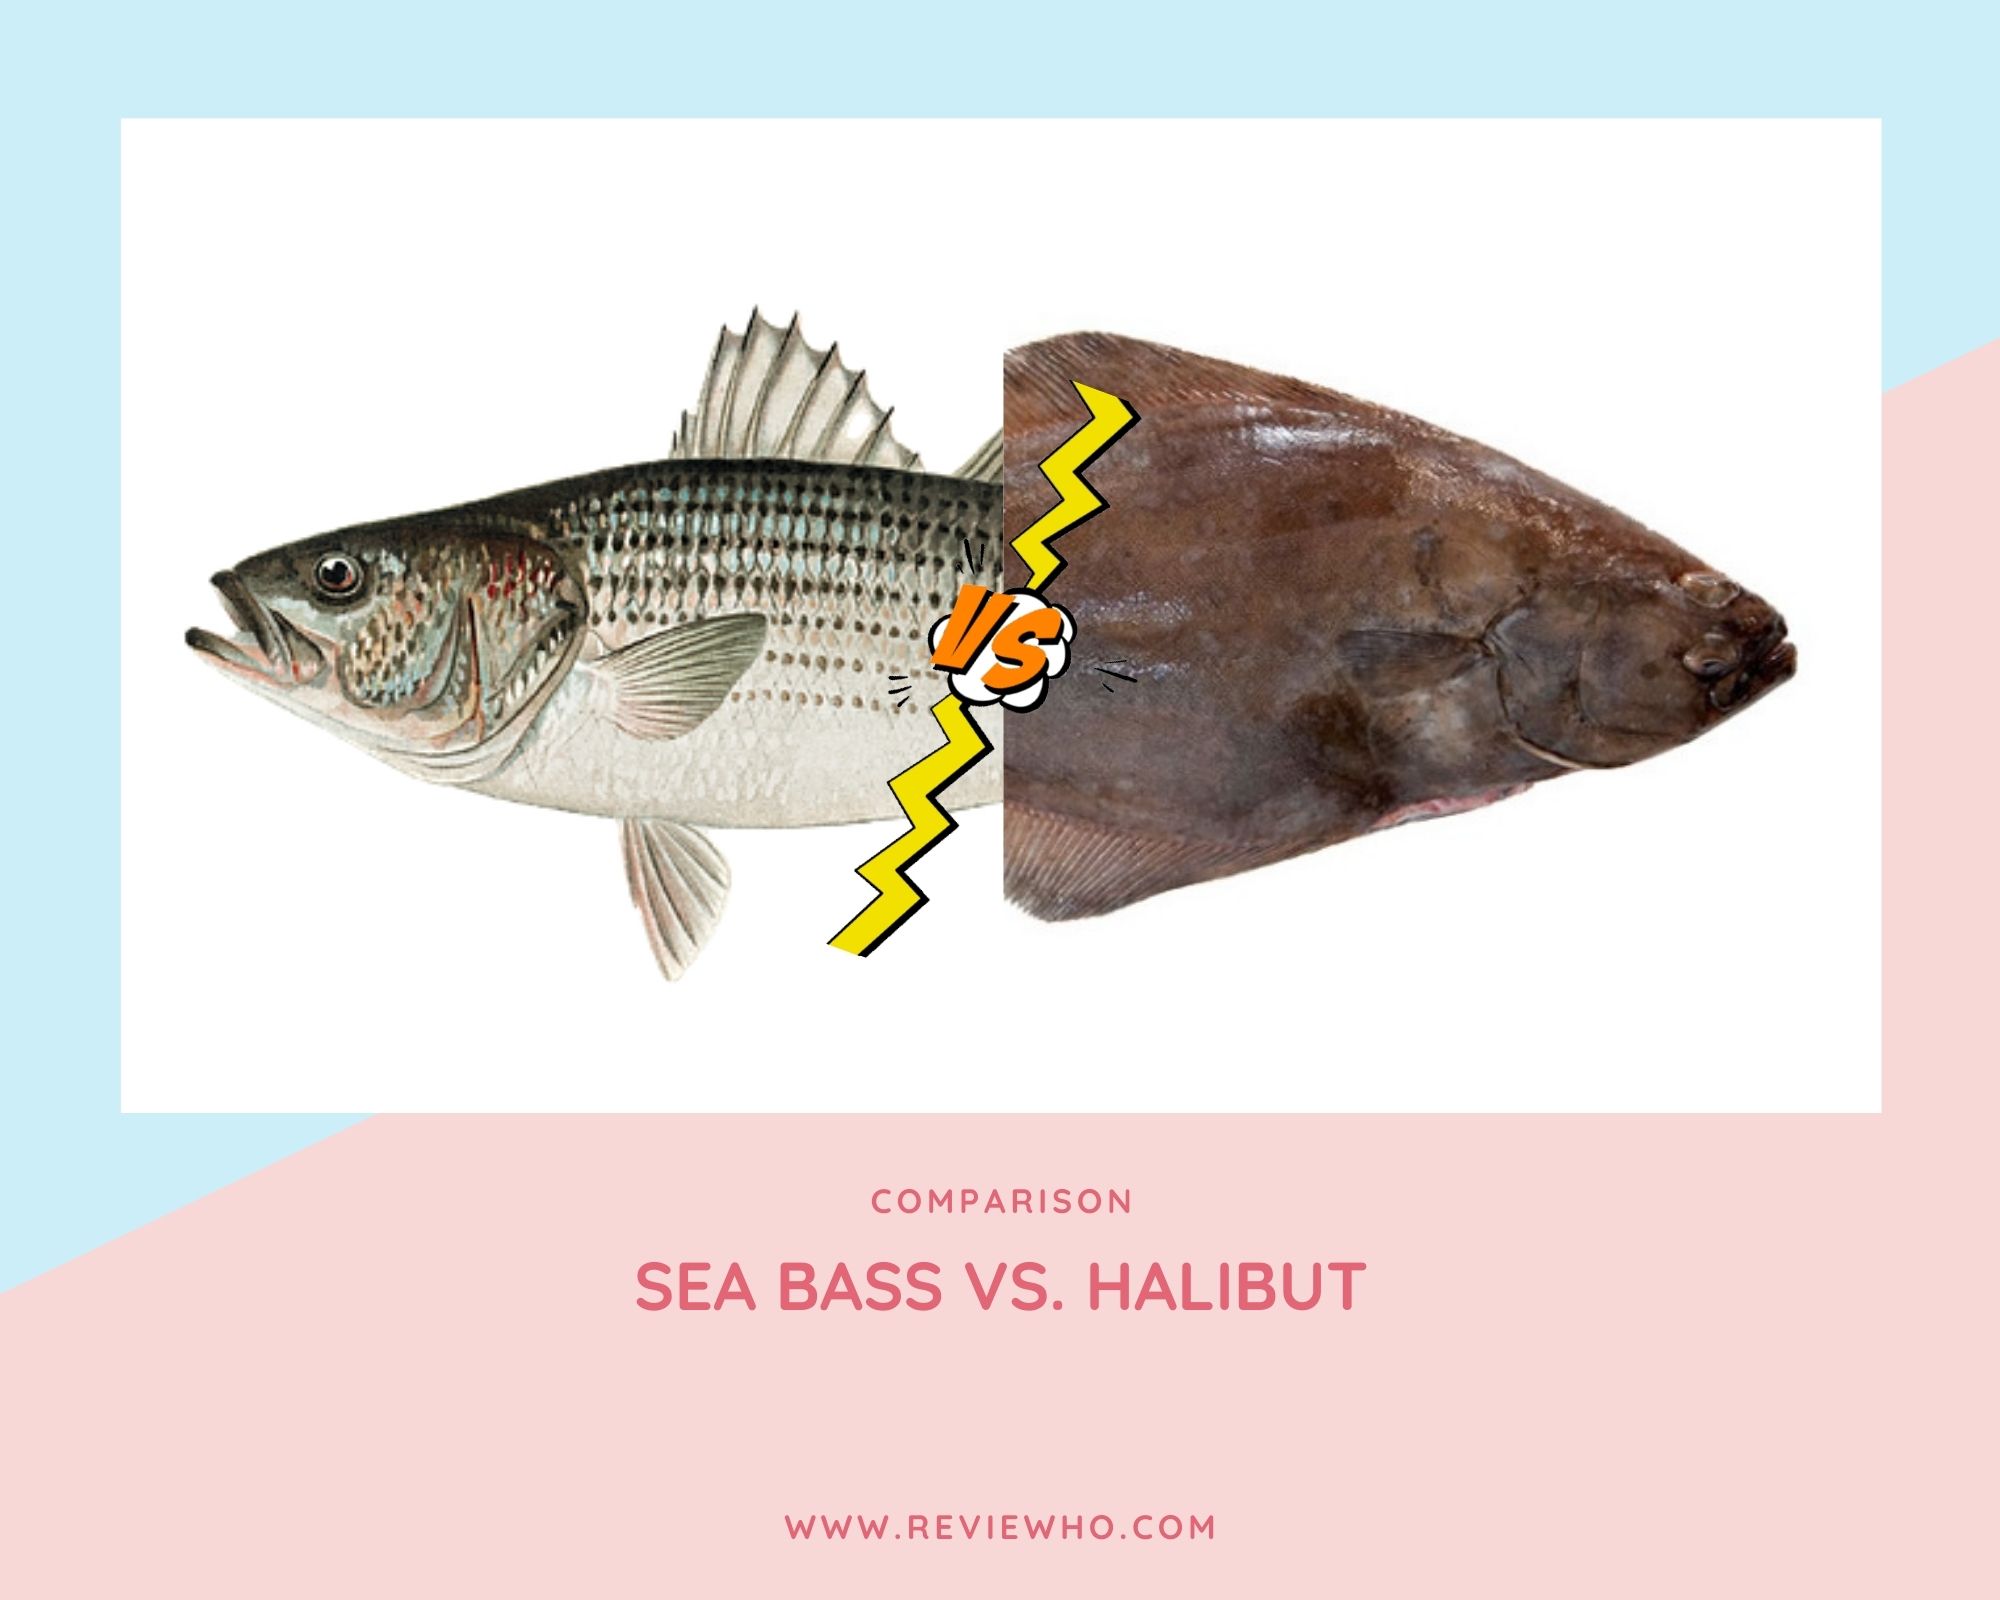 Difference Between Sea Bass and Halibut